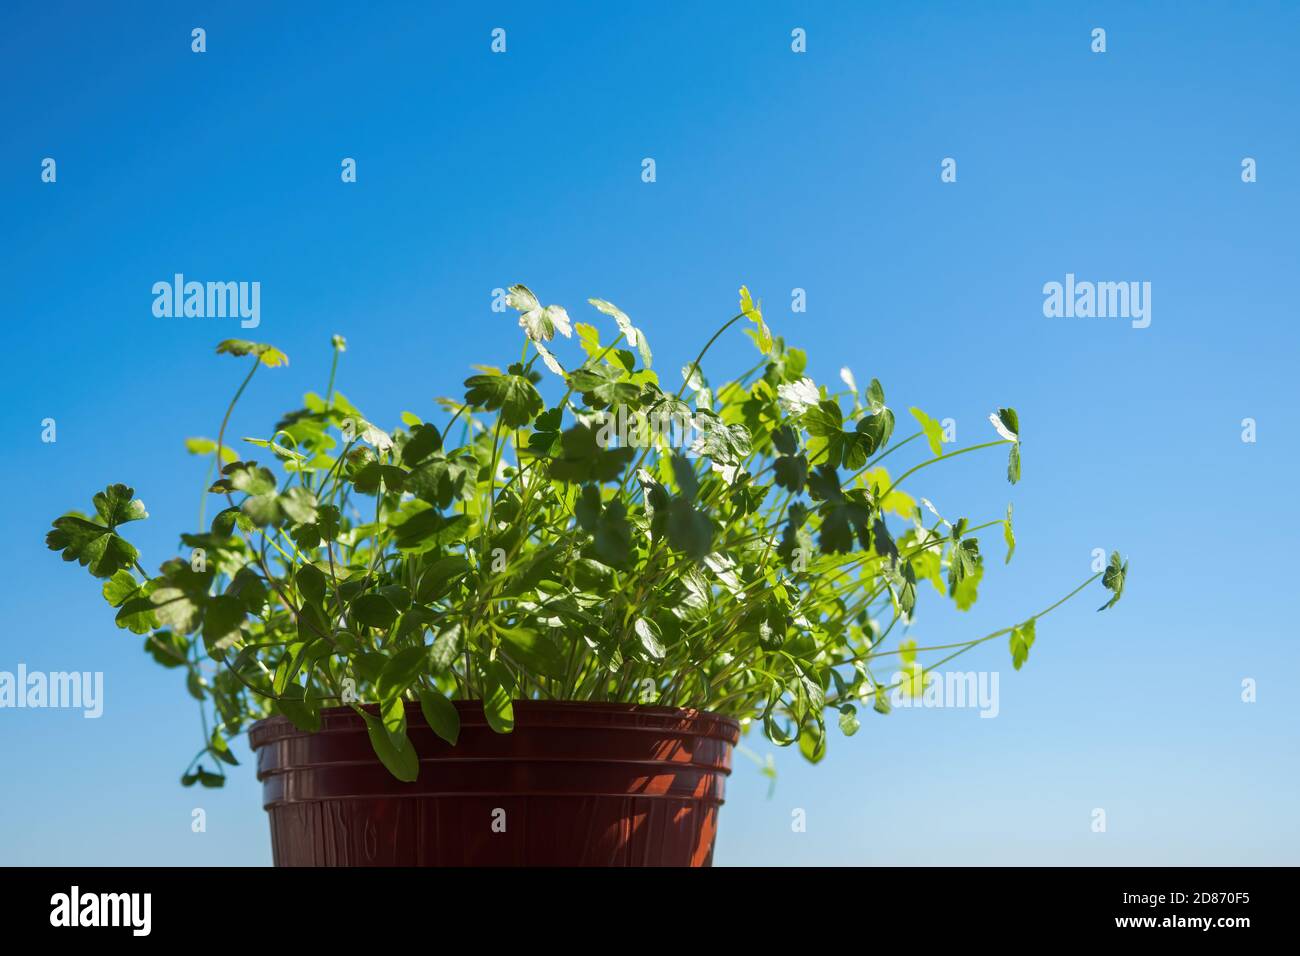 Parsley seedlings in brown pot on blue sky background. Growing micro greens at home, copy space, selective focus. Stock Photo